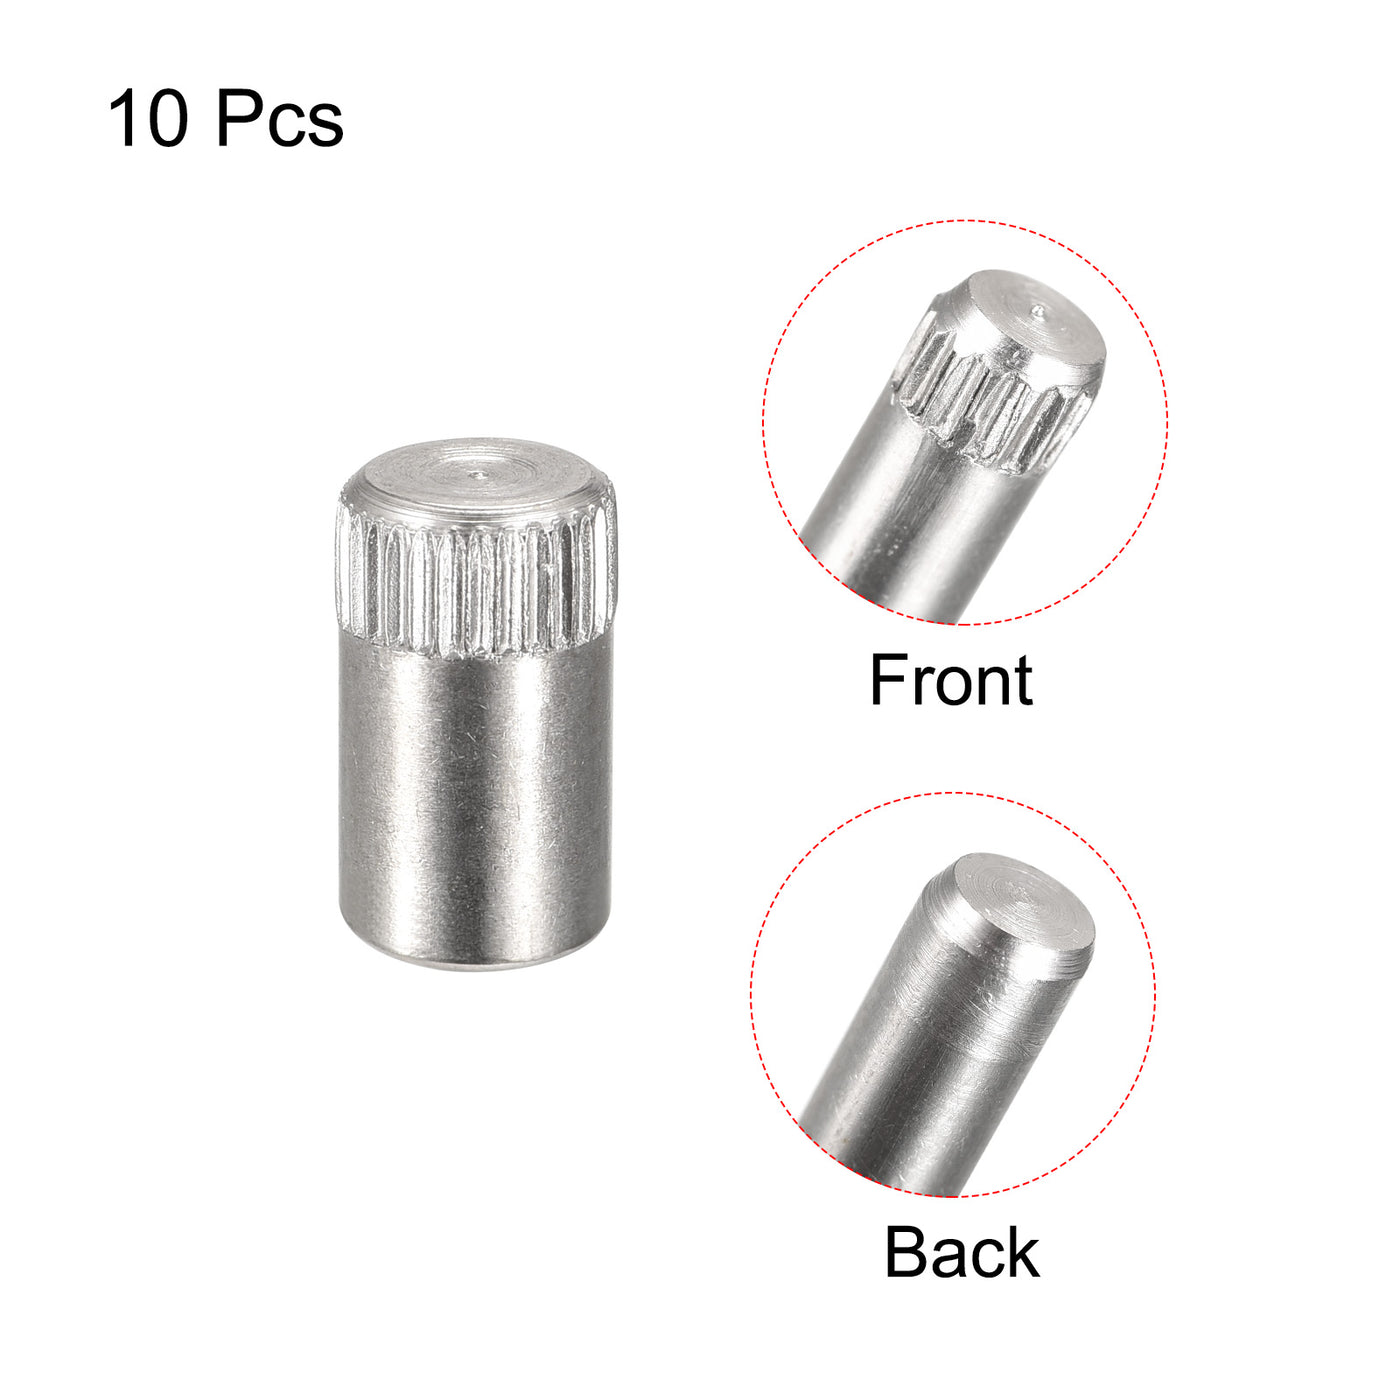 uxcell Uxcell 8x16mm 304 Stainless Steel Dowel Pins, 10Pcs Knurled Head Flat End Dowel Pin